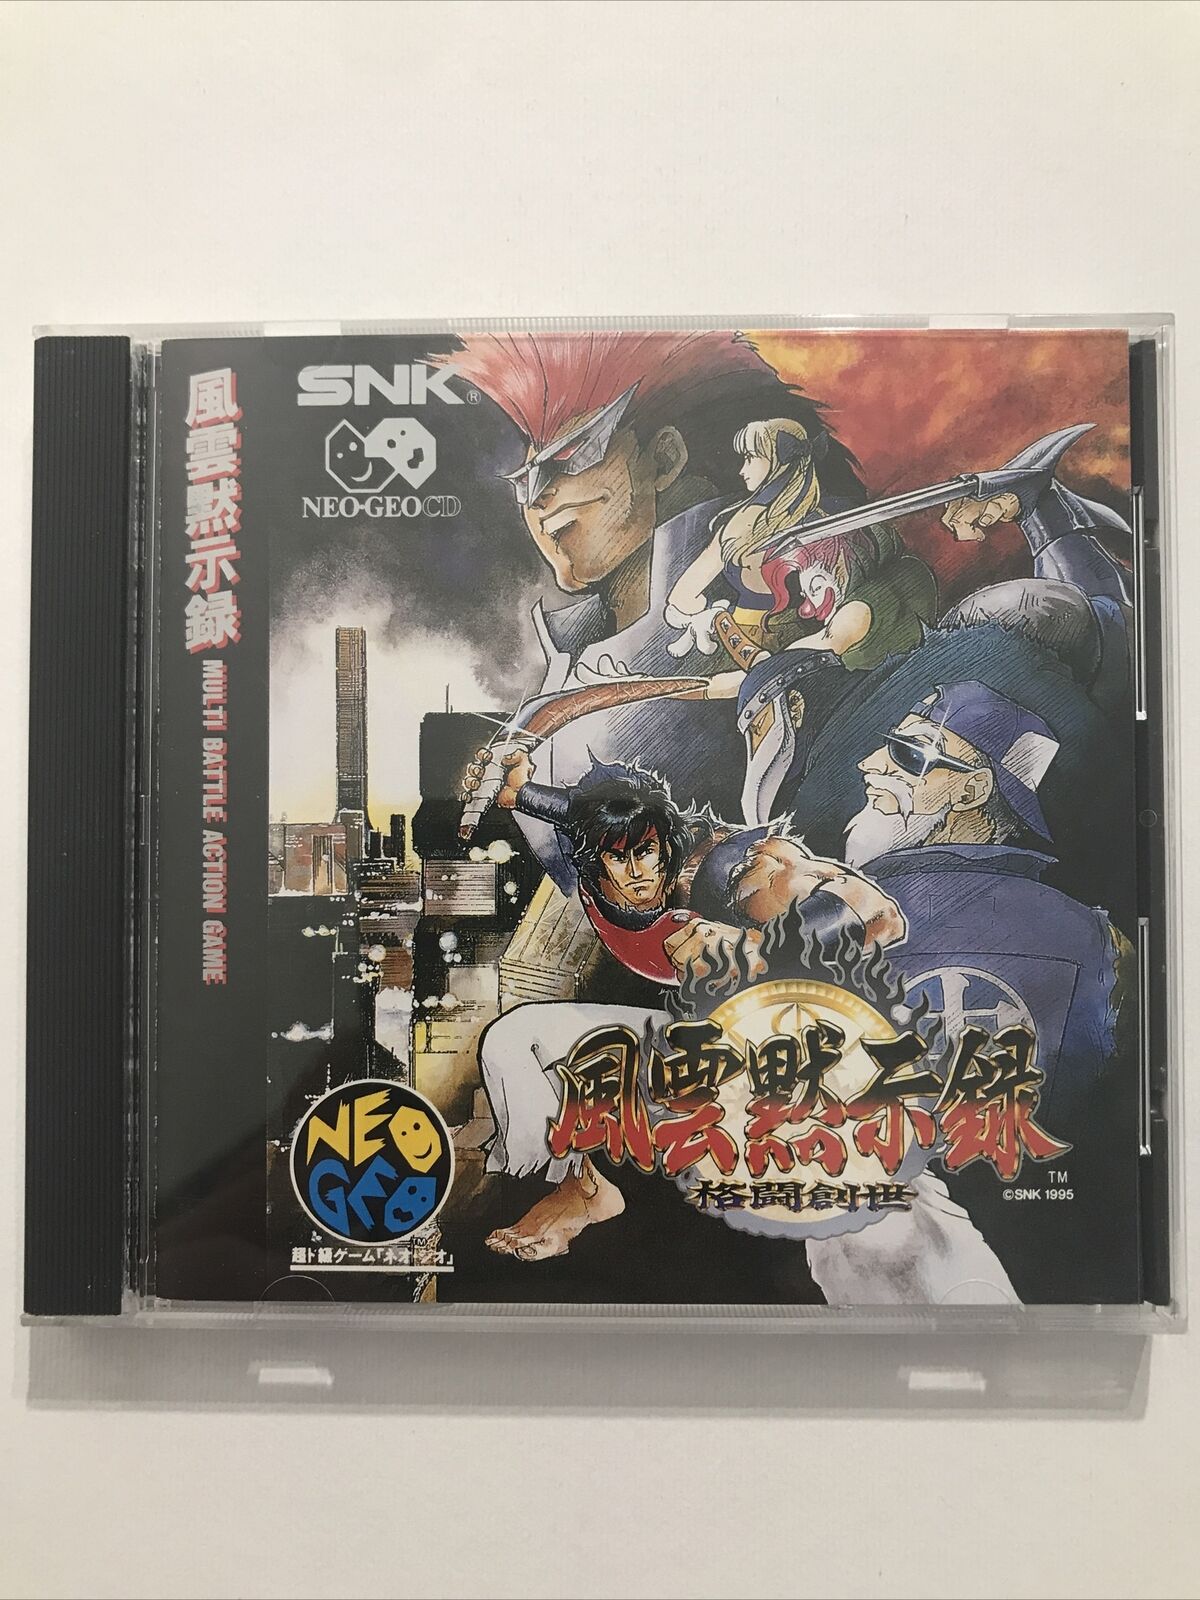 Savage Reign + Spin Card SNK Neo Geo CD Japan